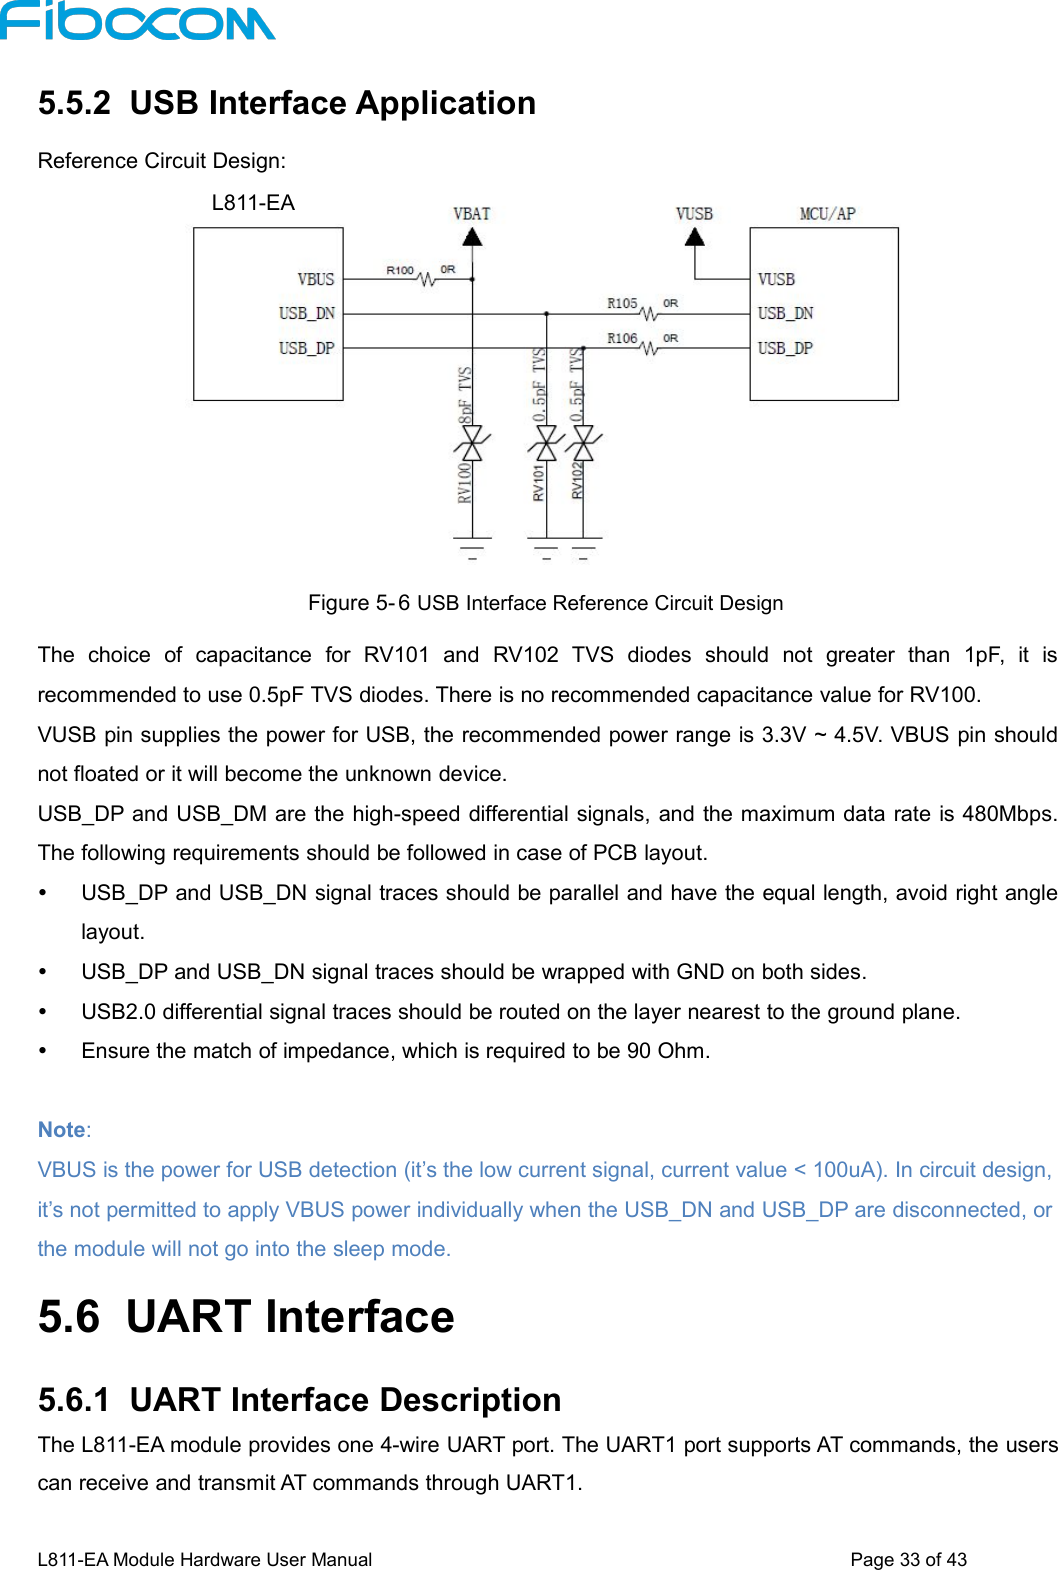 L811-EA Module Hardware User Manual Page33of435.5.2 USB Interface ApplicationReference Circuit Design:Figure 5- 6 USB Interface Reference Circuit DesignThe choice of capacitance for RV101 and RV102 TVS diodes should not greater than 1pF, it isrecommended to use 0.5pF TVS diodes. There is no recommended capacitance value for RV100.VUSB pin supplies the power for USB, the recommended power range is 3.3V ~ 4.5V. VBUS pin shouldnot floated or it will become the unknown device.USB_DP and USB_DM are the high-speed differential signals, and the maximum data rate is 480Mbps.The following requirements should be followed in case of PCB layout.USB_DP and USB_DN signal traces should be parallel and have the equal length, avoid right anglelayout.USB_DP and USB_DN signal traces should be wrapped with GND on both sides.USB2.0 differential signal traces should be routed on the layer nearest to the ground plane.Ensure the match of impedance, which is required to be 90 Ohm.Note:VBUS is the power for USB detection (it’s the low current signal, current value &lt; 100uA). In circuit design,it’s not permitted to apply VBUS power individually when the USB_DN and USB_DP are disconnected, orthe module will not go into the sleep mode.5.6 UART Interface5.6.1 UART Interface DescriptionThe L811-EA module provides one 4-wire UART port. The UART1 port supports AT commands, the userscan receive and transmit AT commands through UART1.L811-EA